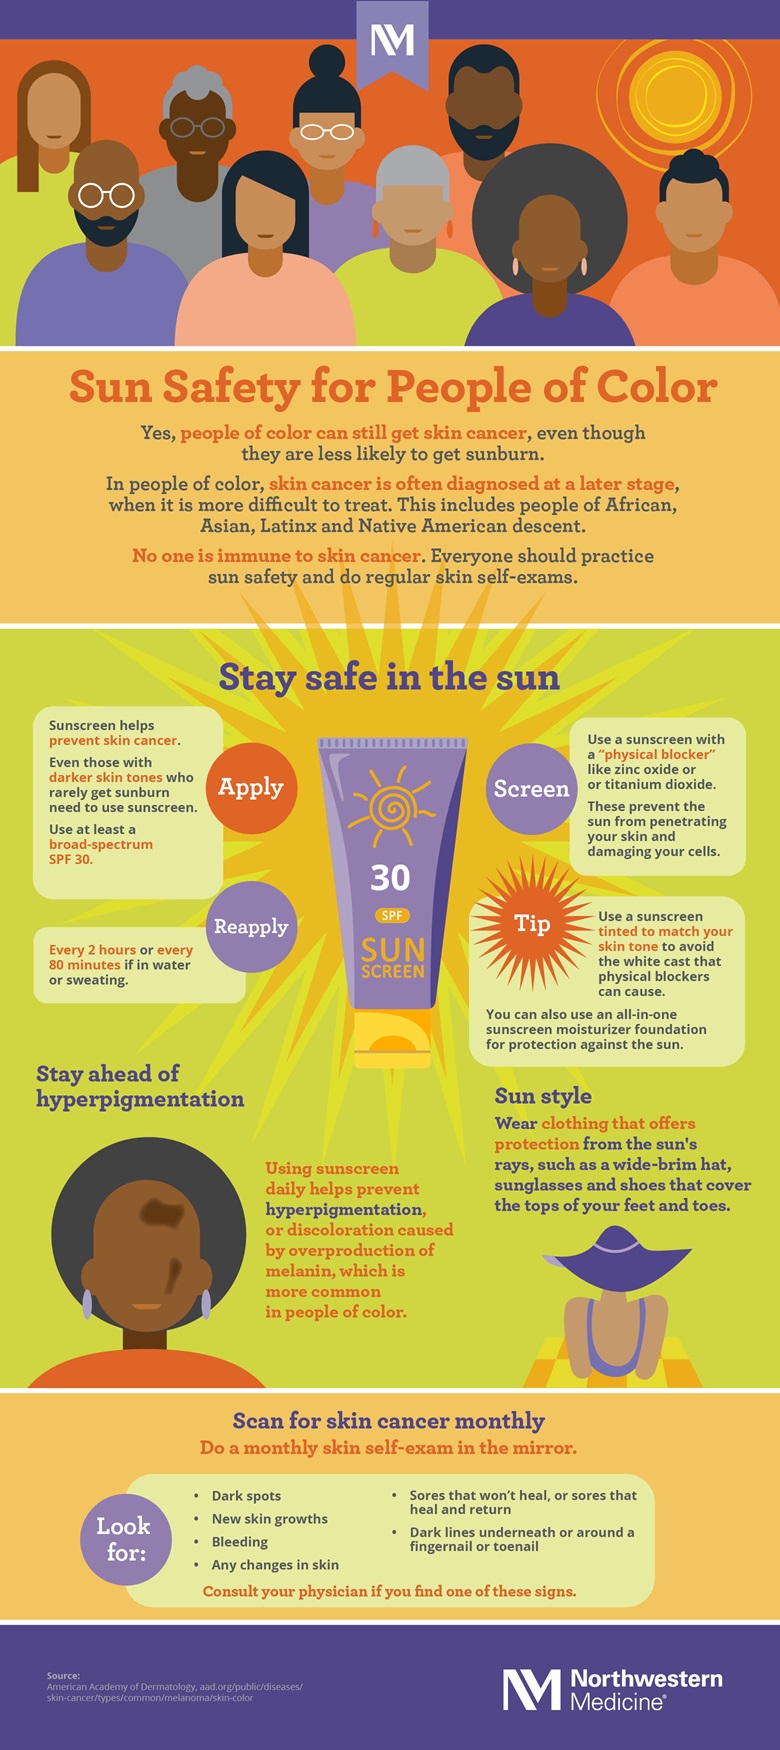 Sun Safety for People of Color